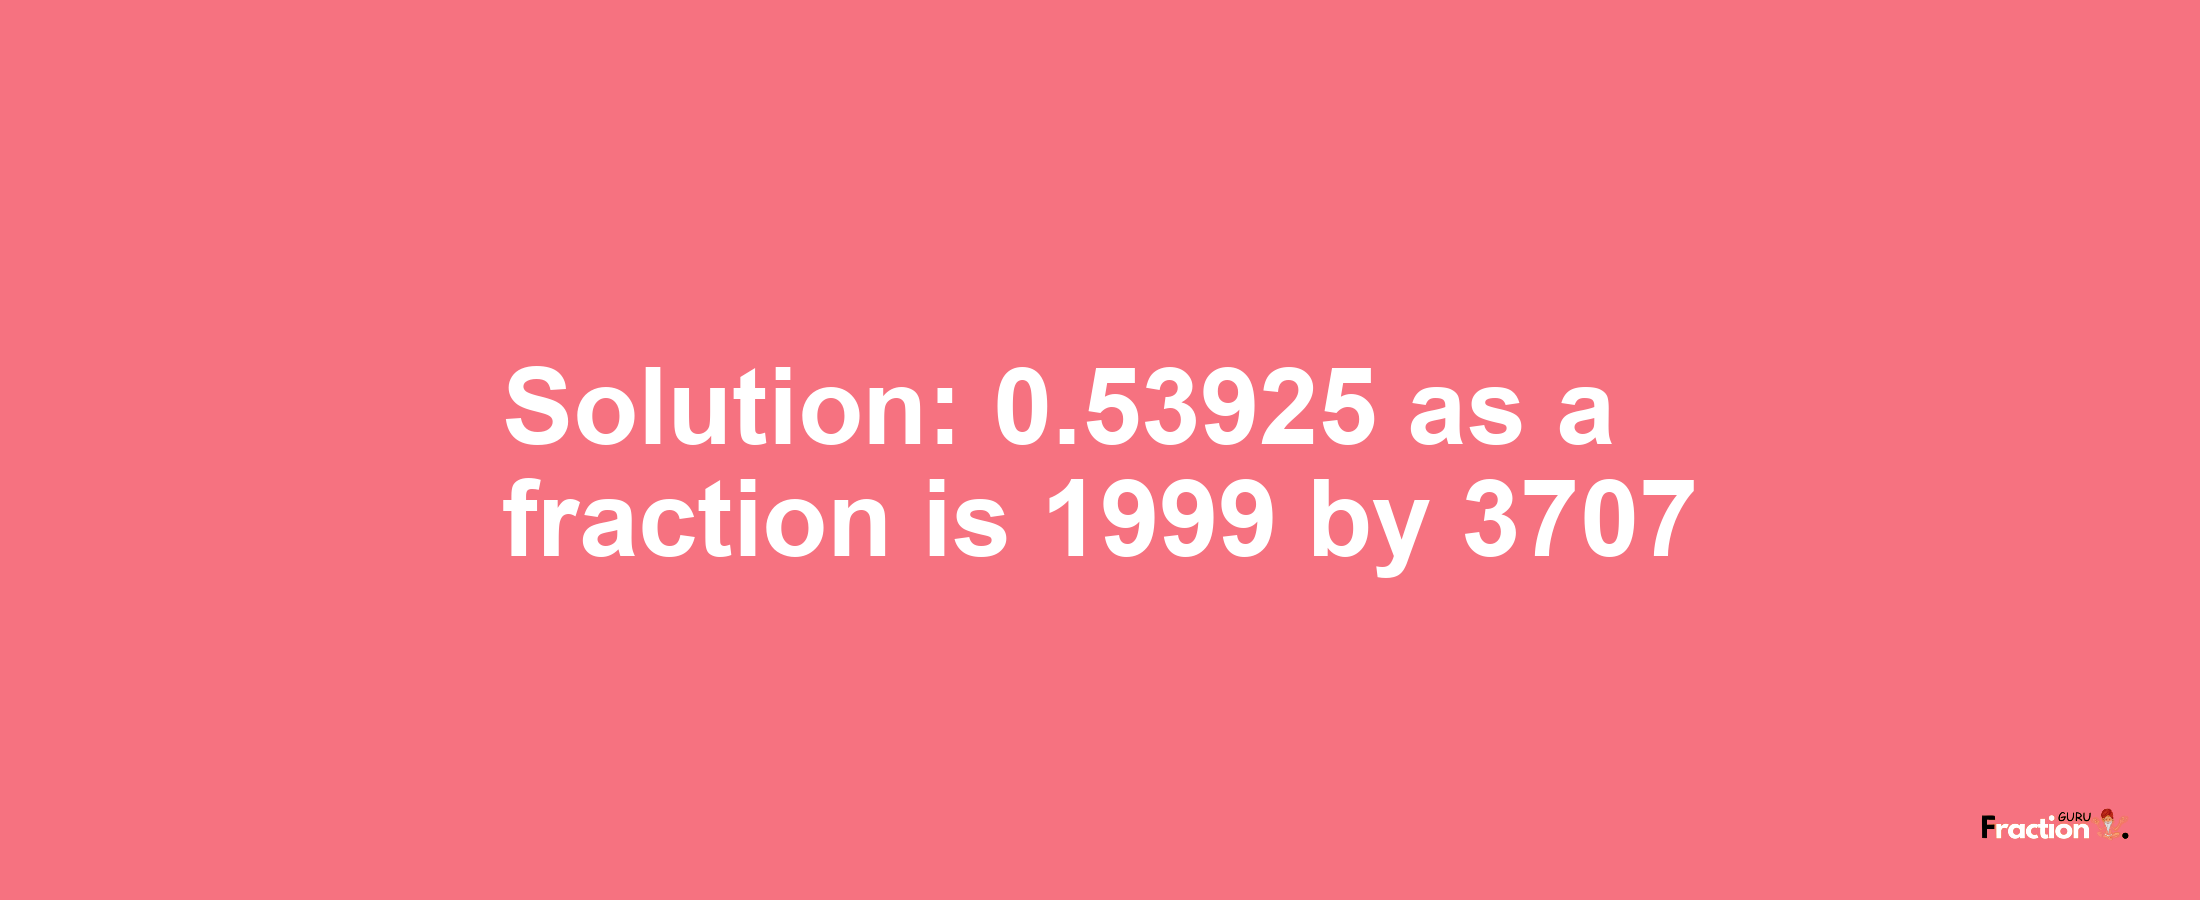 Solution:0.53925 as a fraction is 1999/3707